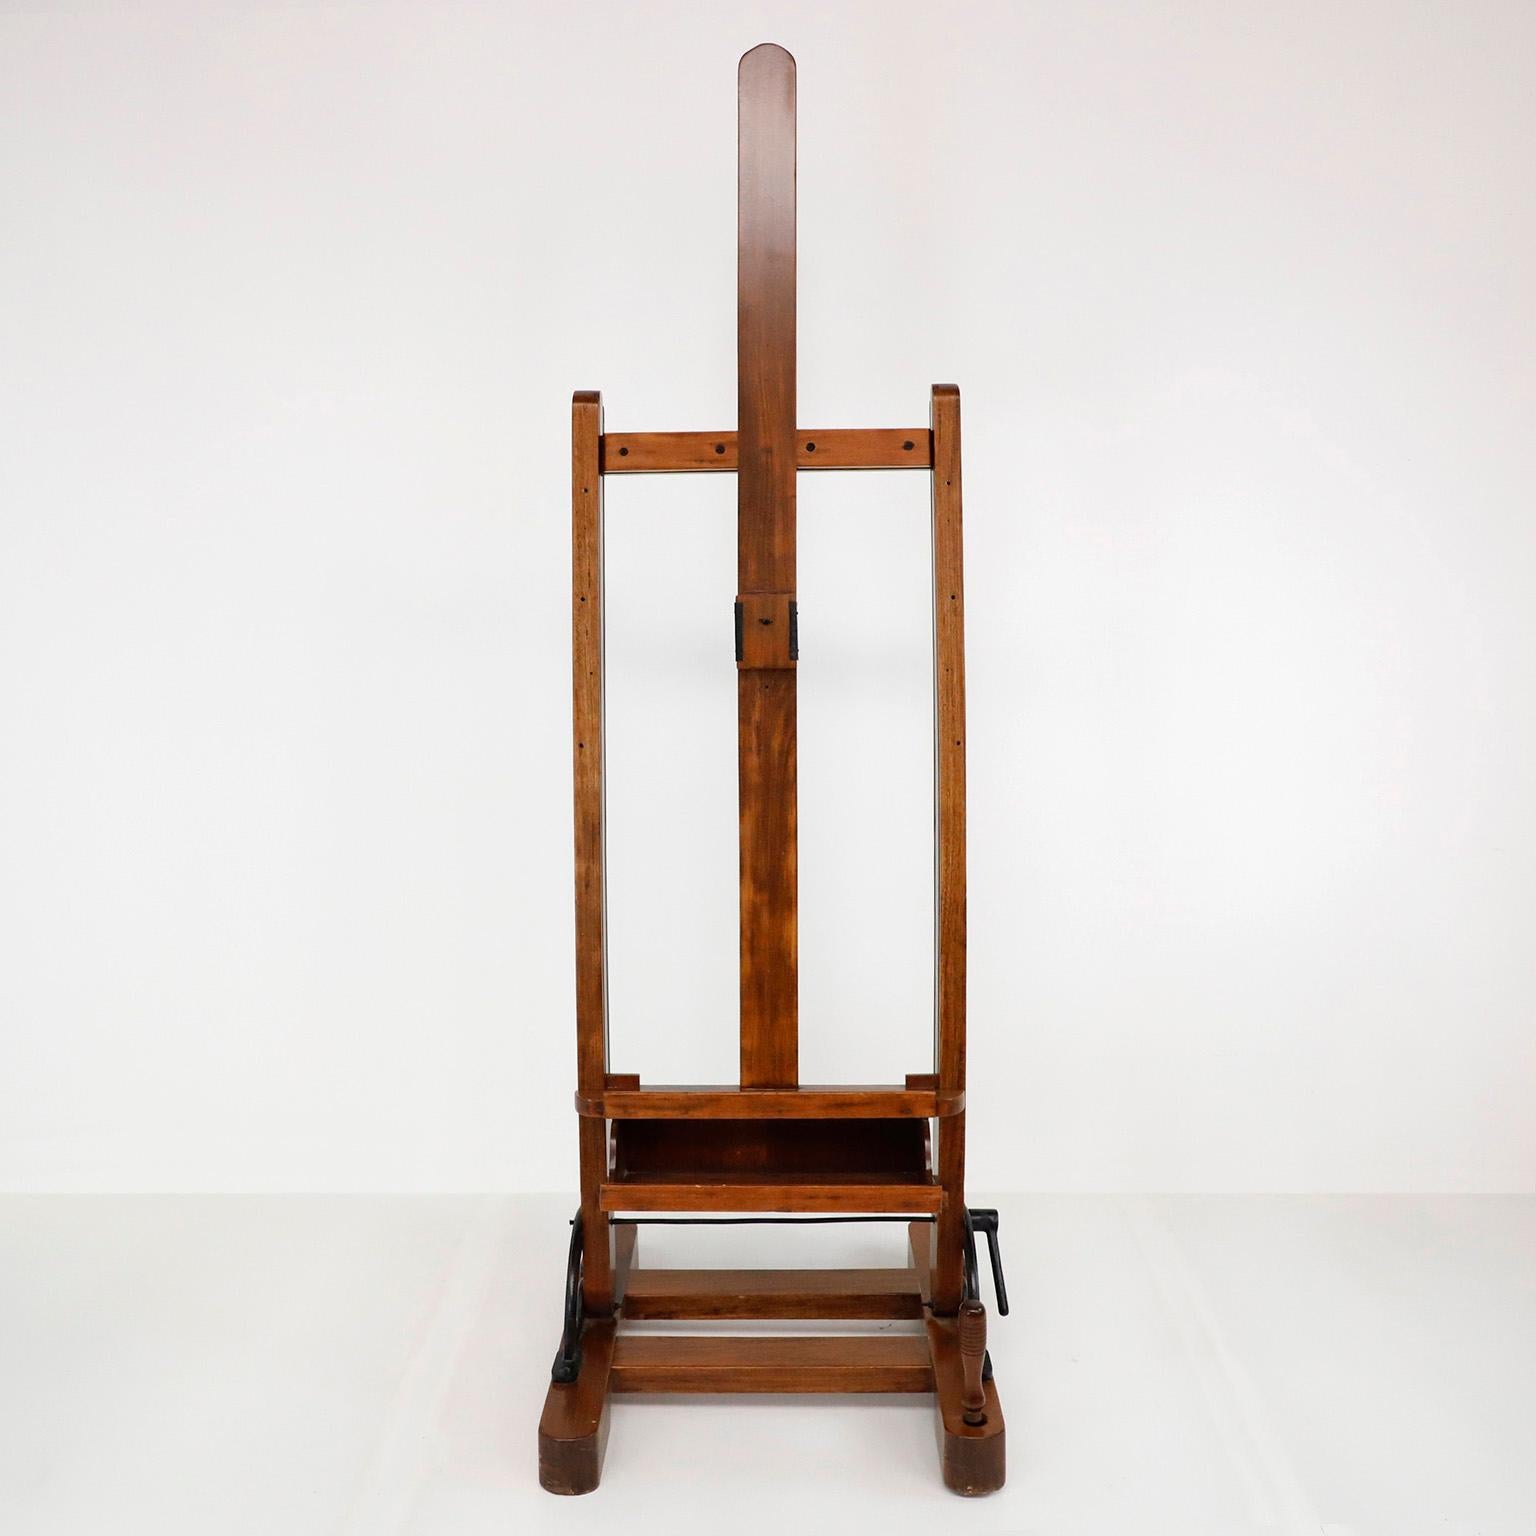 circa 1950, we offer this Rare Mexican wood adjustable Artist Easel, made in tiger Oak wood This easel has the same design as those currently in the study of Diego Rivera and Frida Kahlo, ready for the next Frida Kahlo! Height is adjustable.